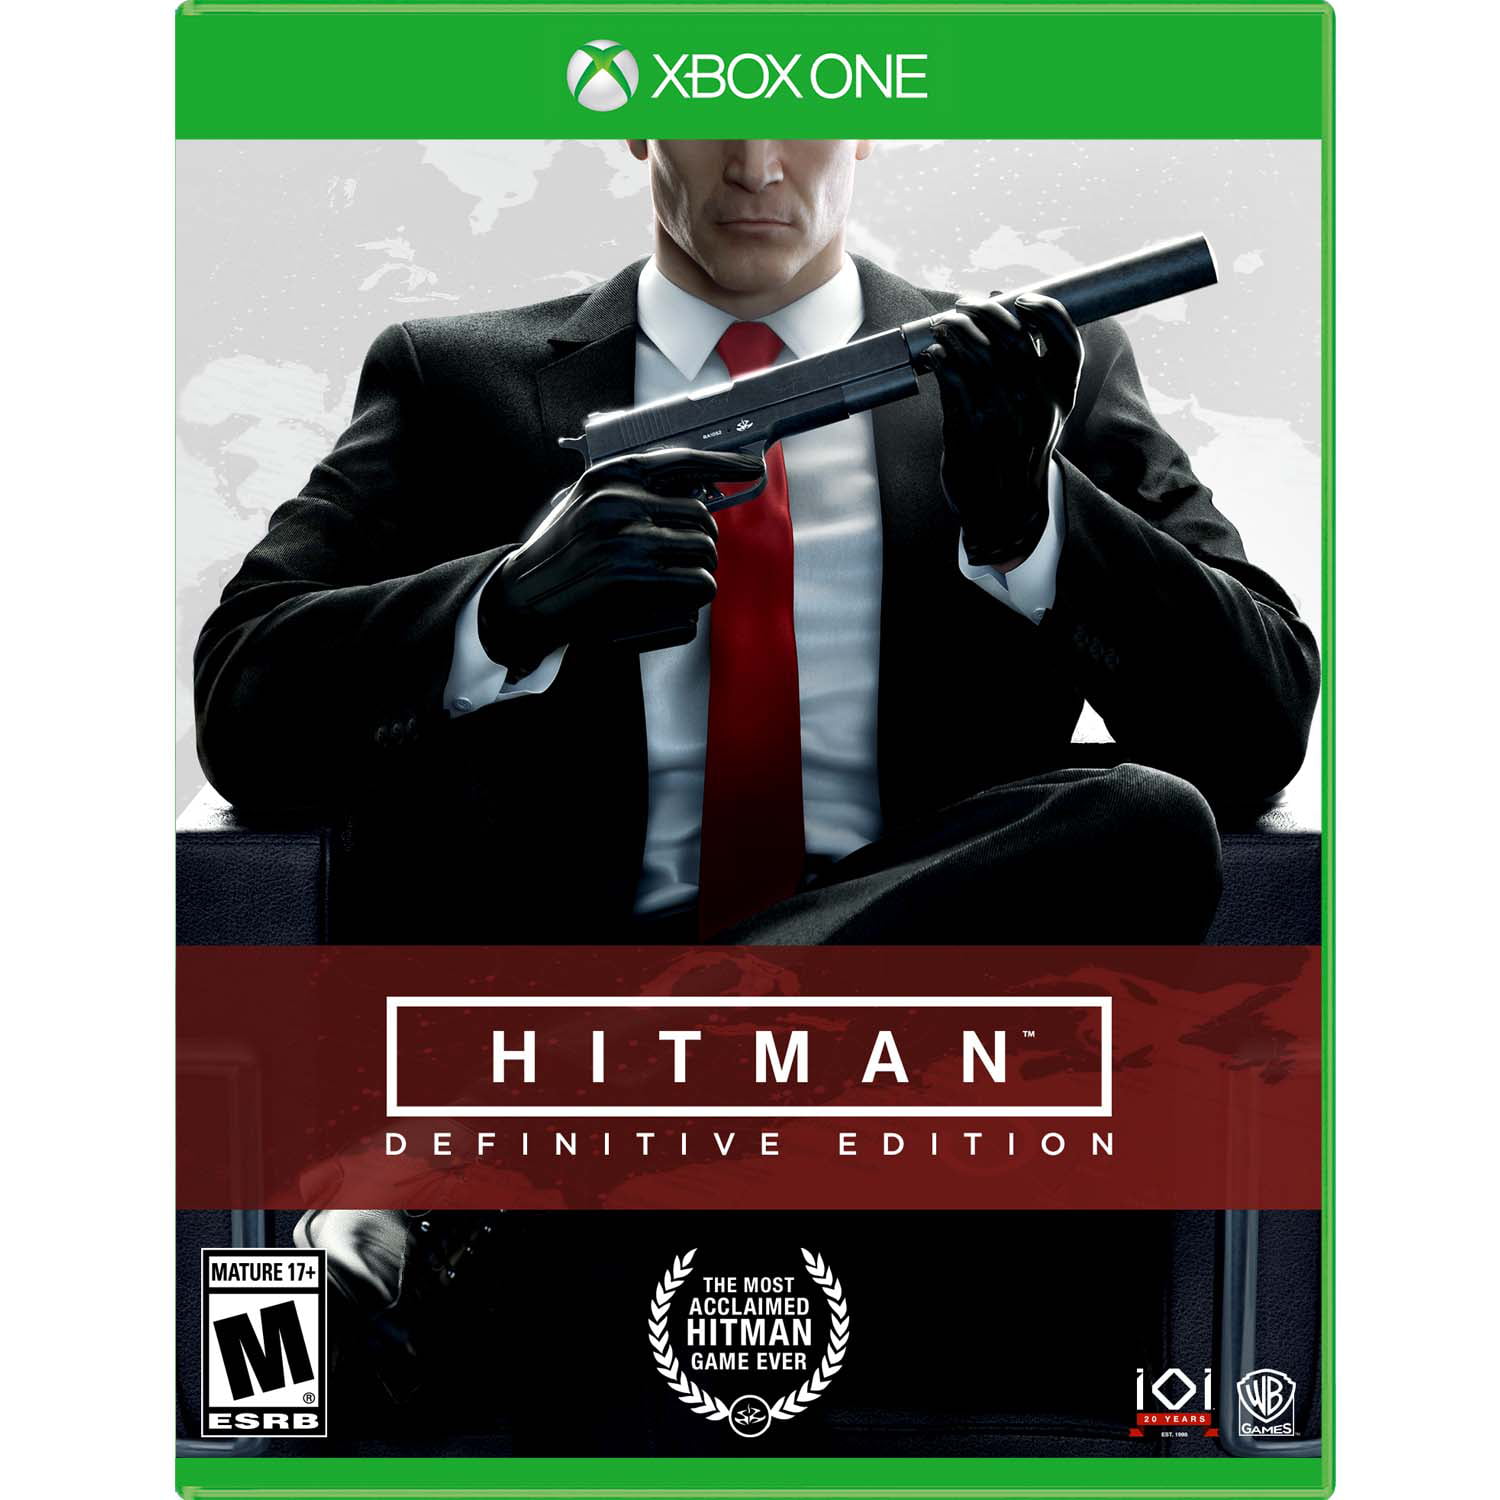 Hitman: Definitive Edition, Warner Home Video, Xbox One, REFURBISHED/PREOWNED